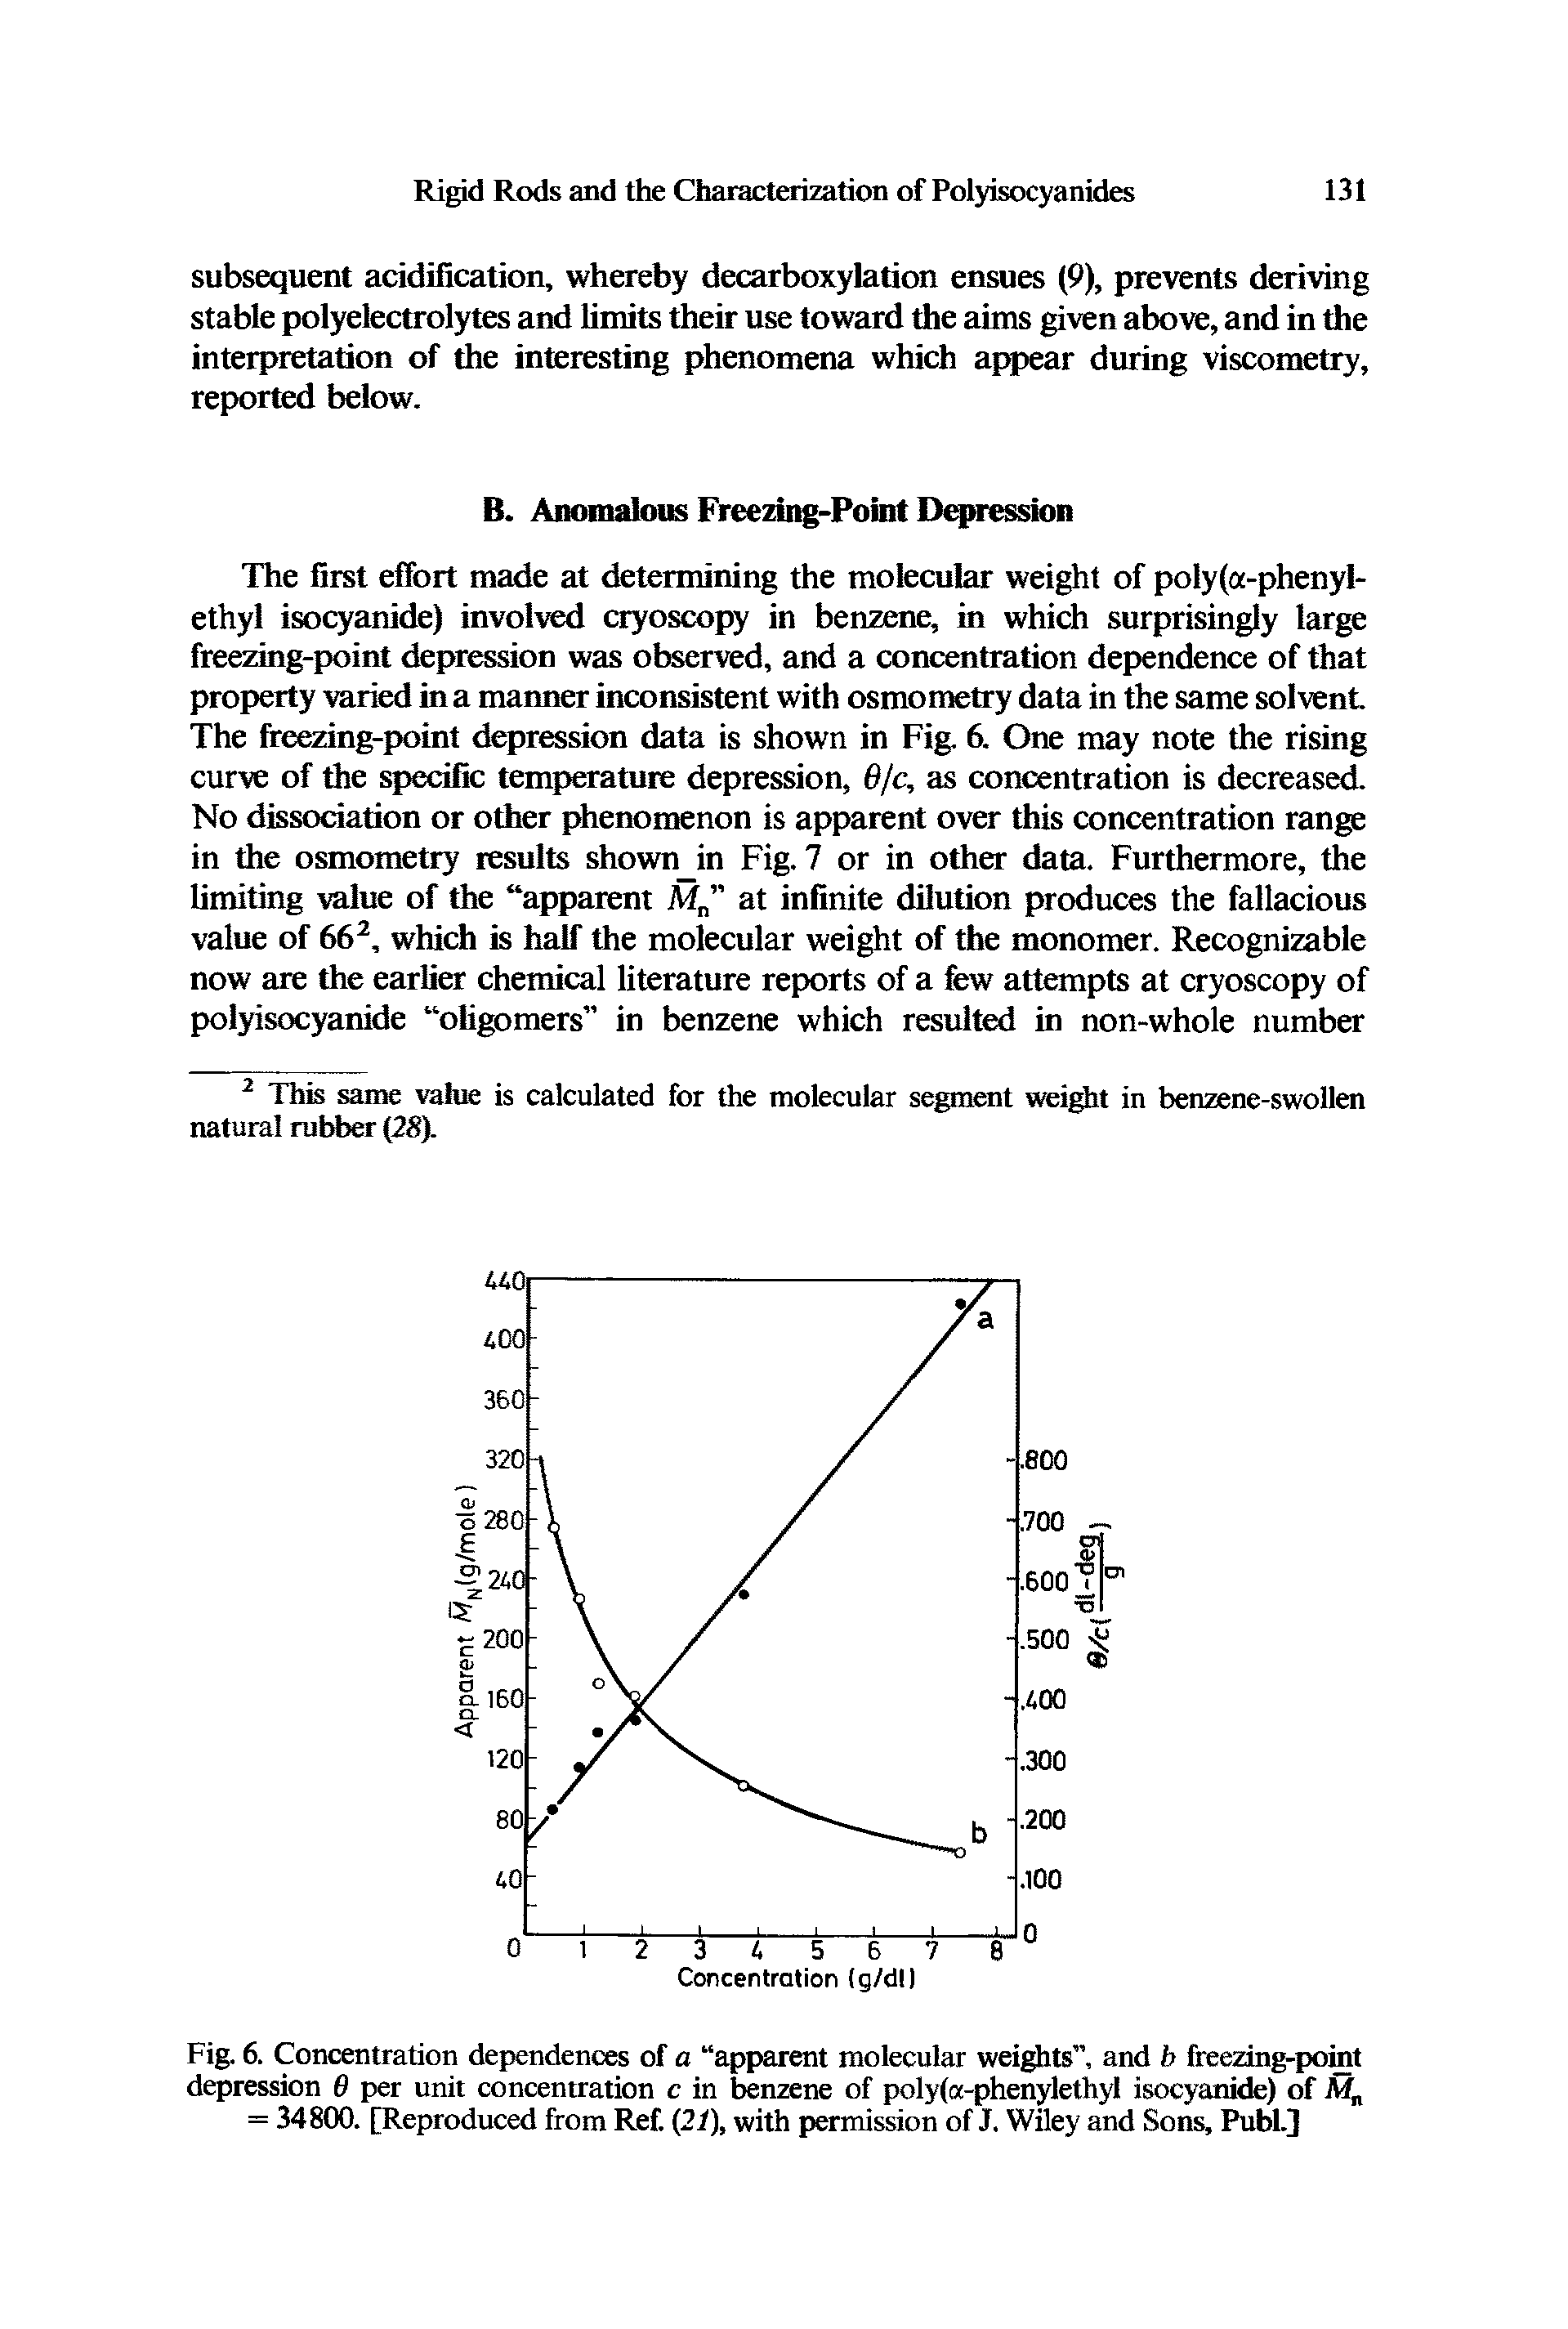 Fig. 6. Concentration dependences of a apparent molecular weights ", and b freezing-point depression 6 per unit concentration c in benzene of poly(a-phenylethyl isocyanide) of Mn = 34800. [Reproduced from Ref. (21), with permission of J. Wiley and Sons, Publ.]...